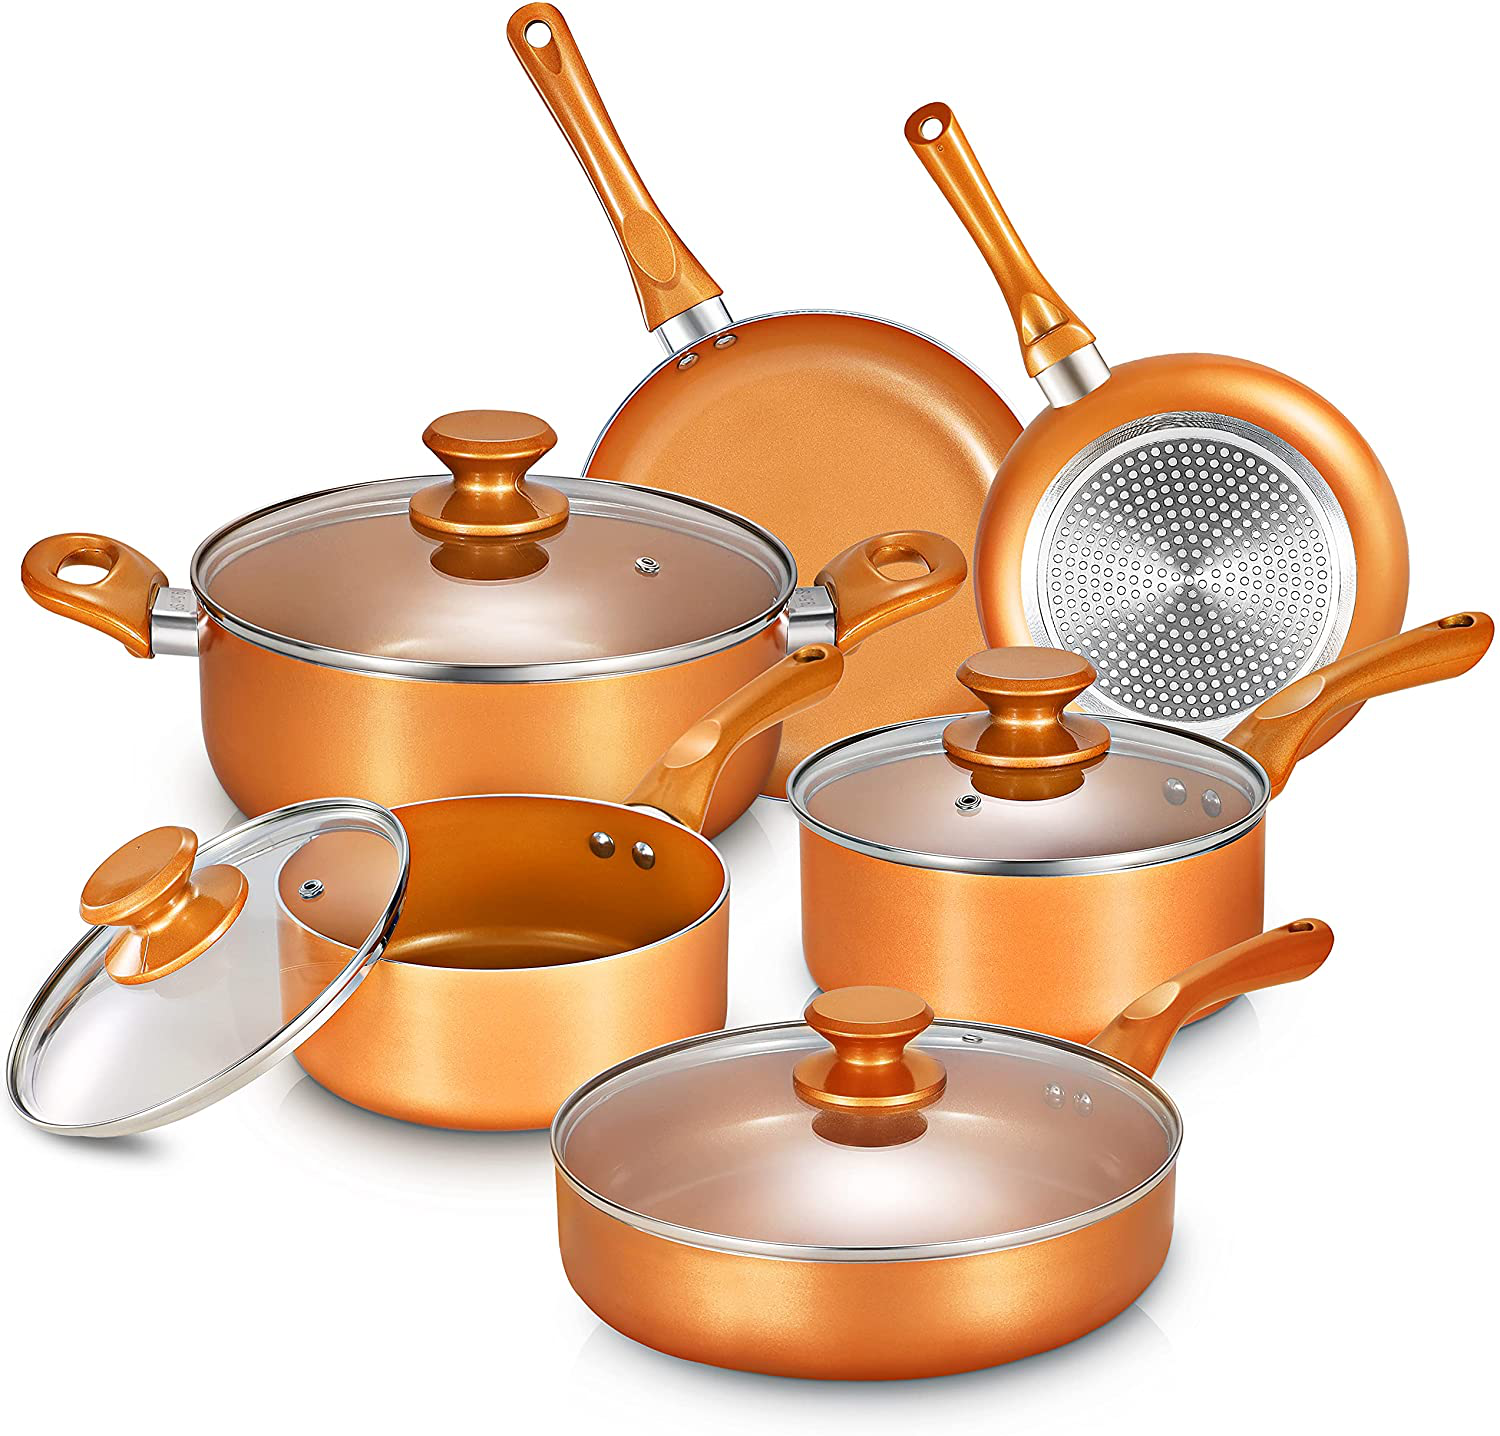 6-piece Non-stick Cookware Set Pots and Pans Set for Cooking - Ceramic  Coating Saucepan, Stock Pot with Lid, Frying Pan, Copper